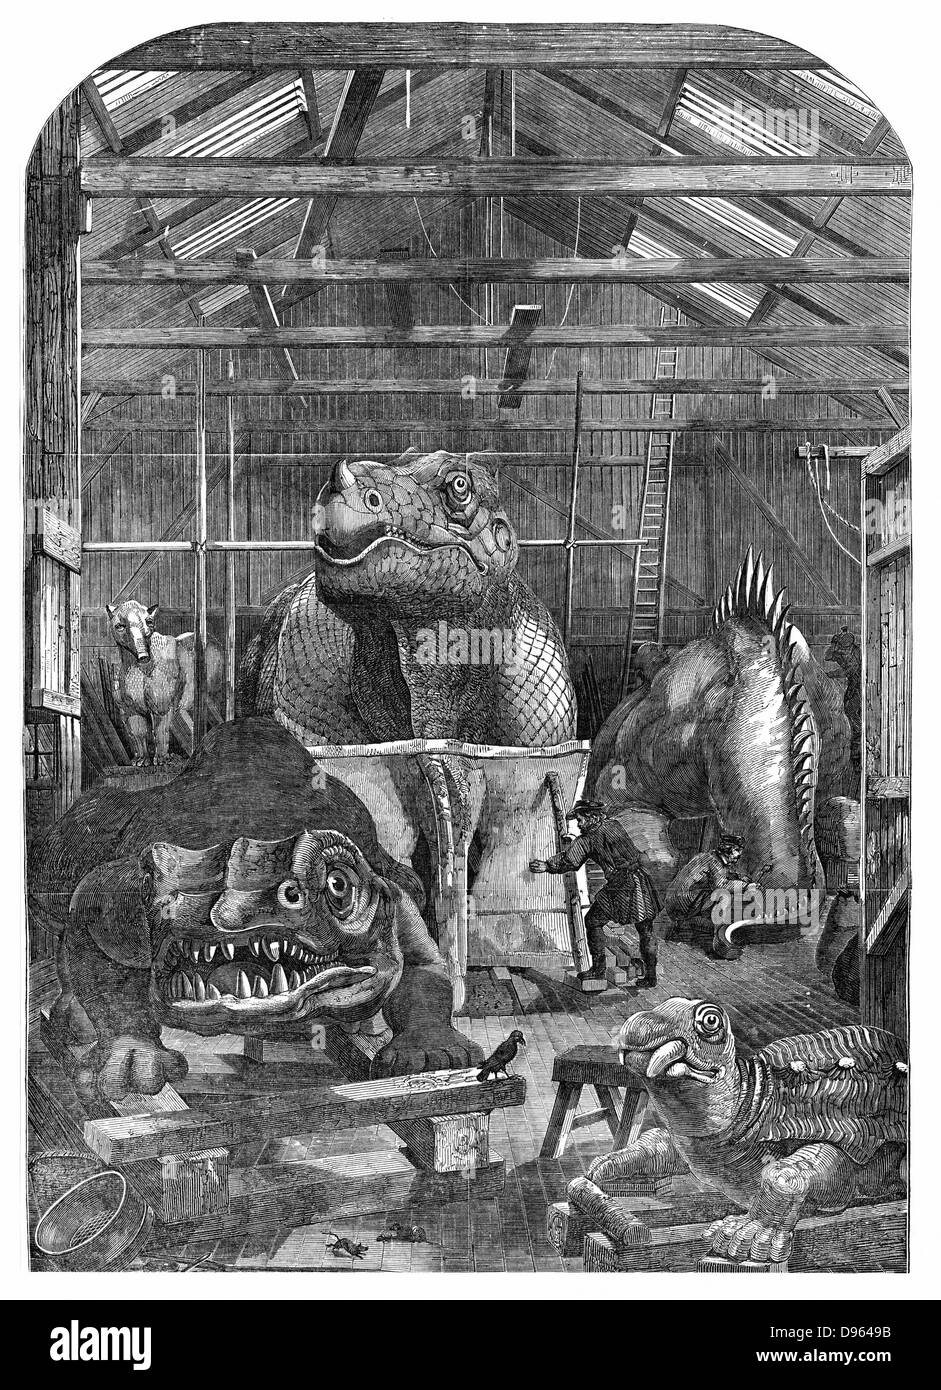 The 'Extinct Animals' model room at Crystal Palace, Sydenham, showing models of dinosaurs being prepared for display. Benjamin Waterhouse Hawkins (1807-1889) prepared the display.  From 'The Illustrated London News' (London, 31 December 1853). Wood engraving. Stock Photo